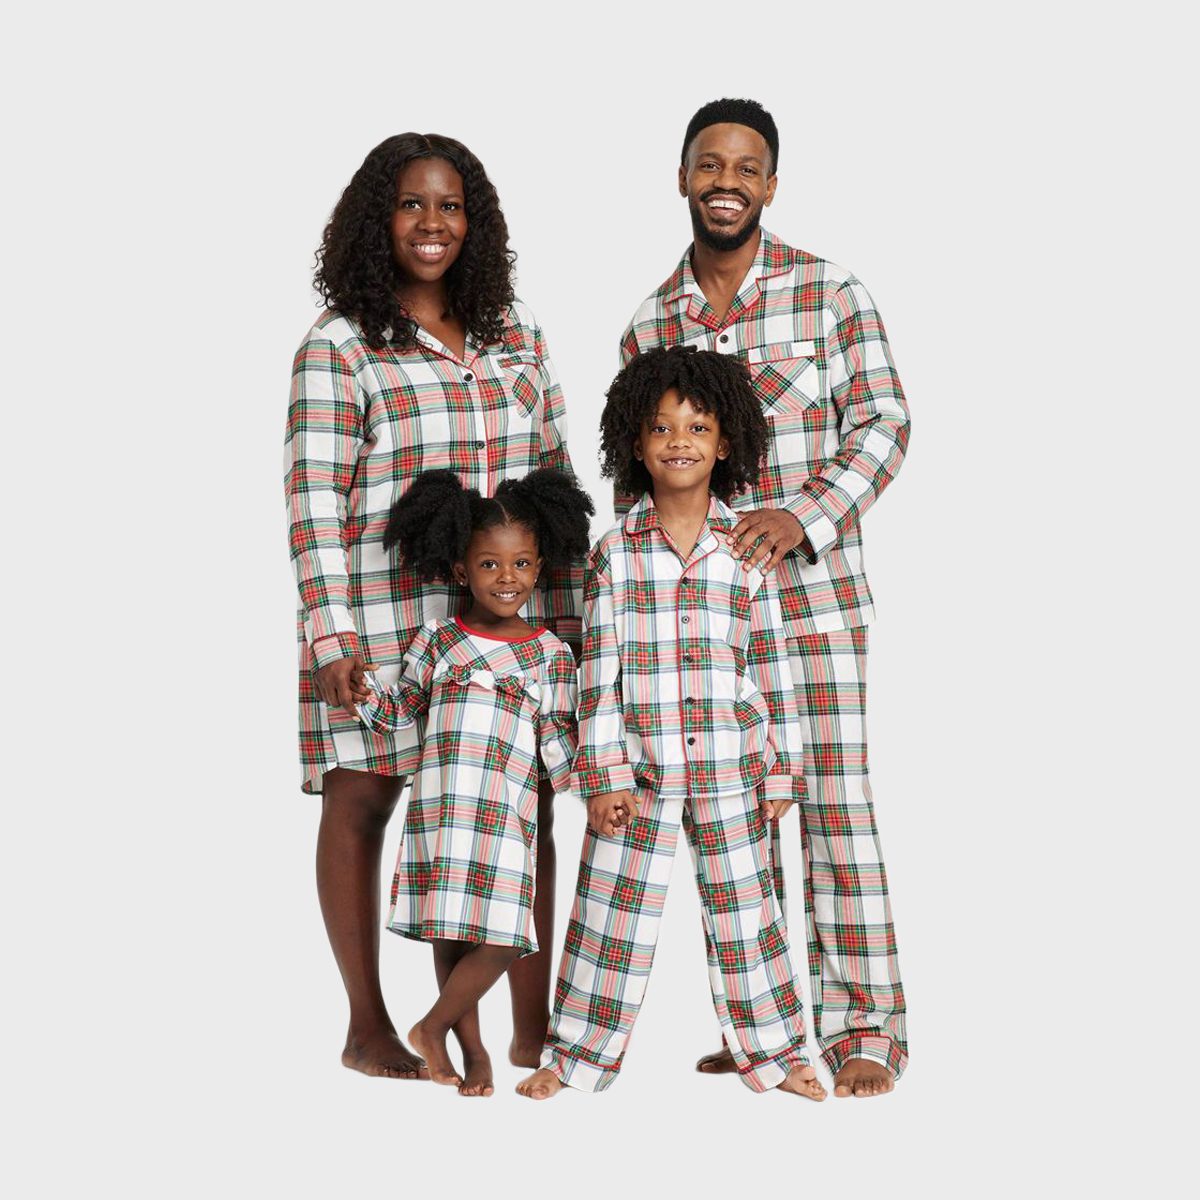 Same Day Delivery Items Prime Christmas Pajamas For Family Reindeer Gnomes  Printed Pjs Sets Comfy Two Piece Nightgowns Long Sleeve Shirts Buffalo